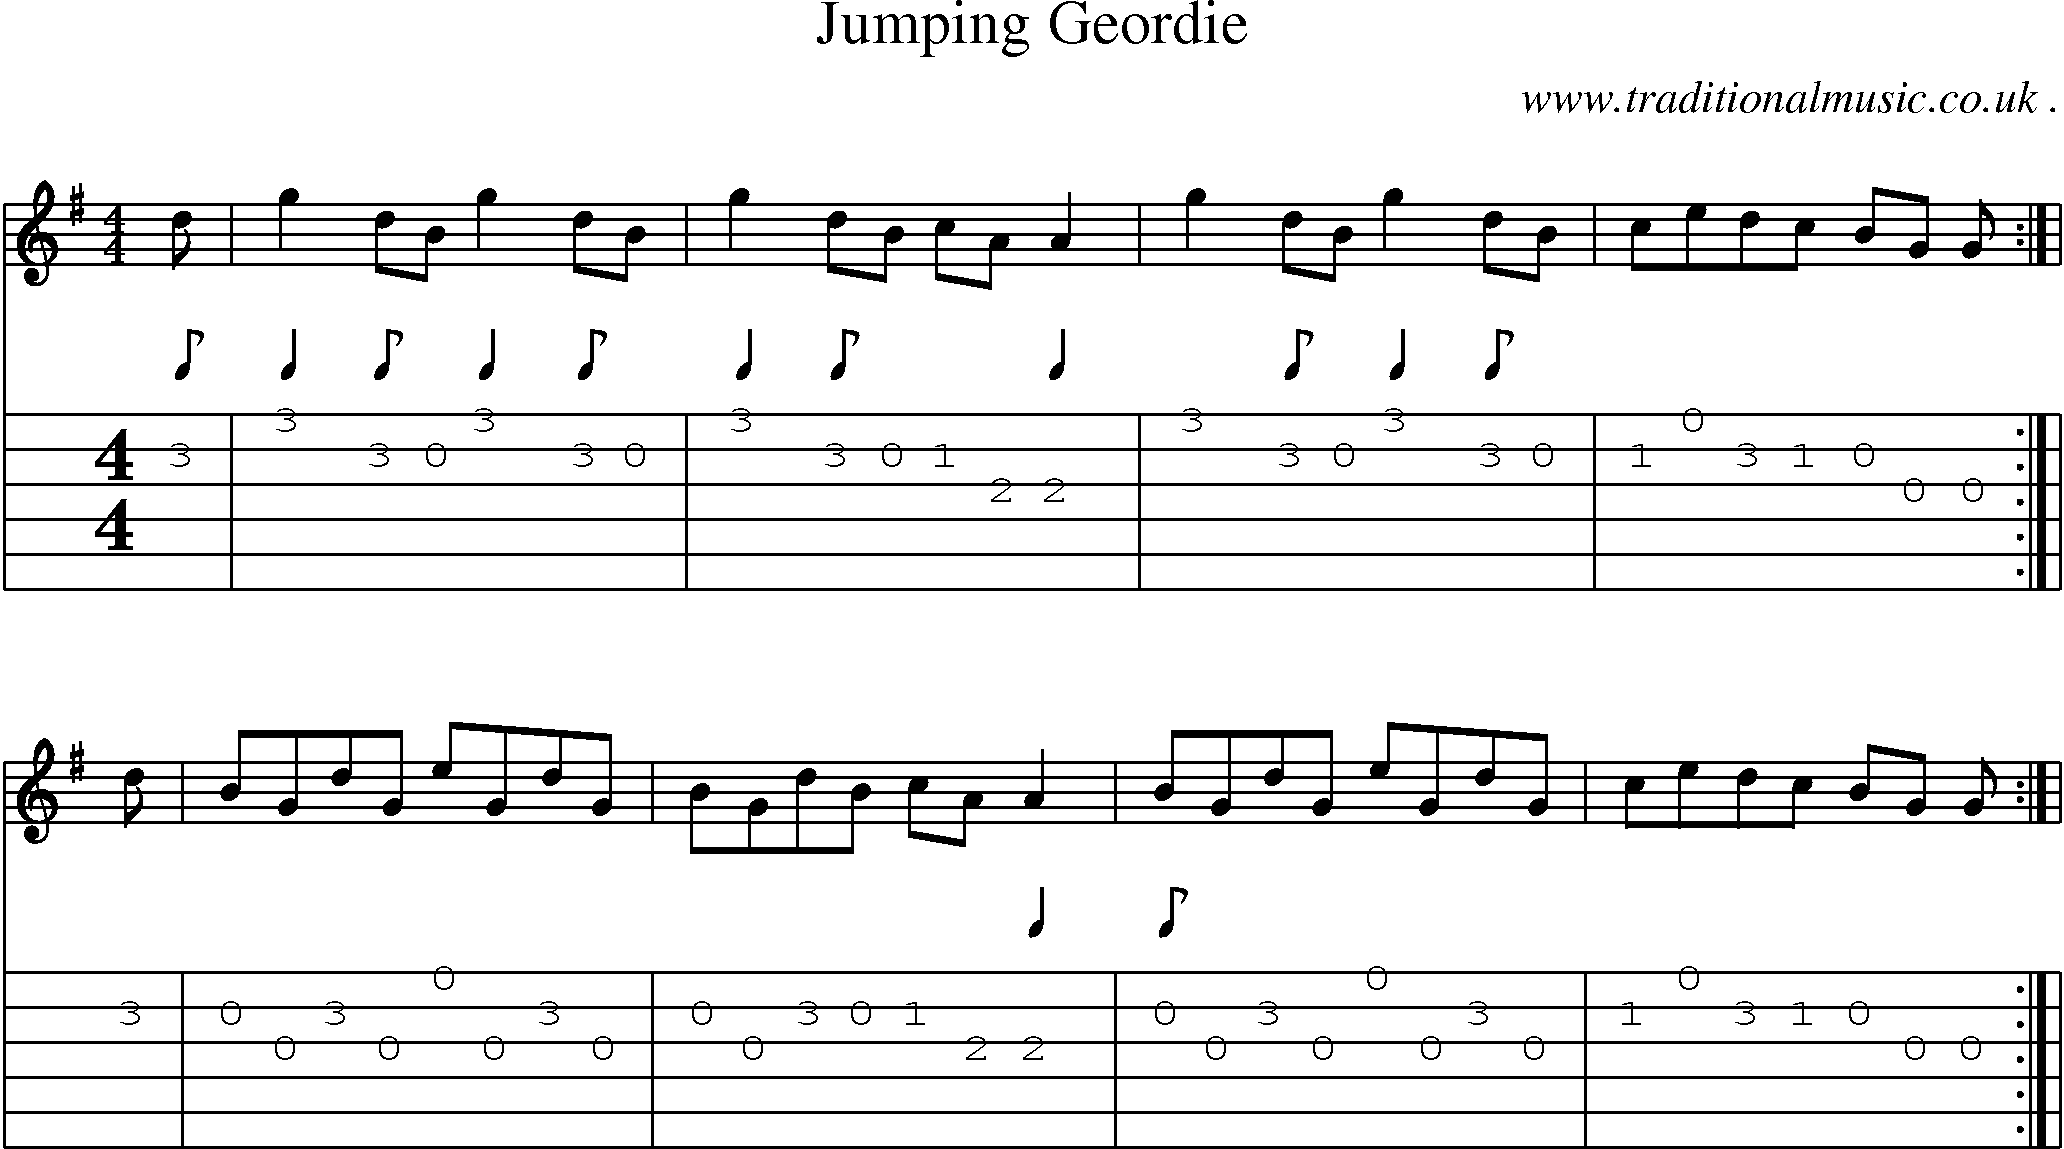 Sheet-Music and Guitar Tabs for Jumping Geordie